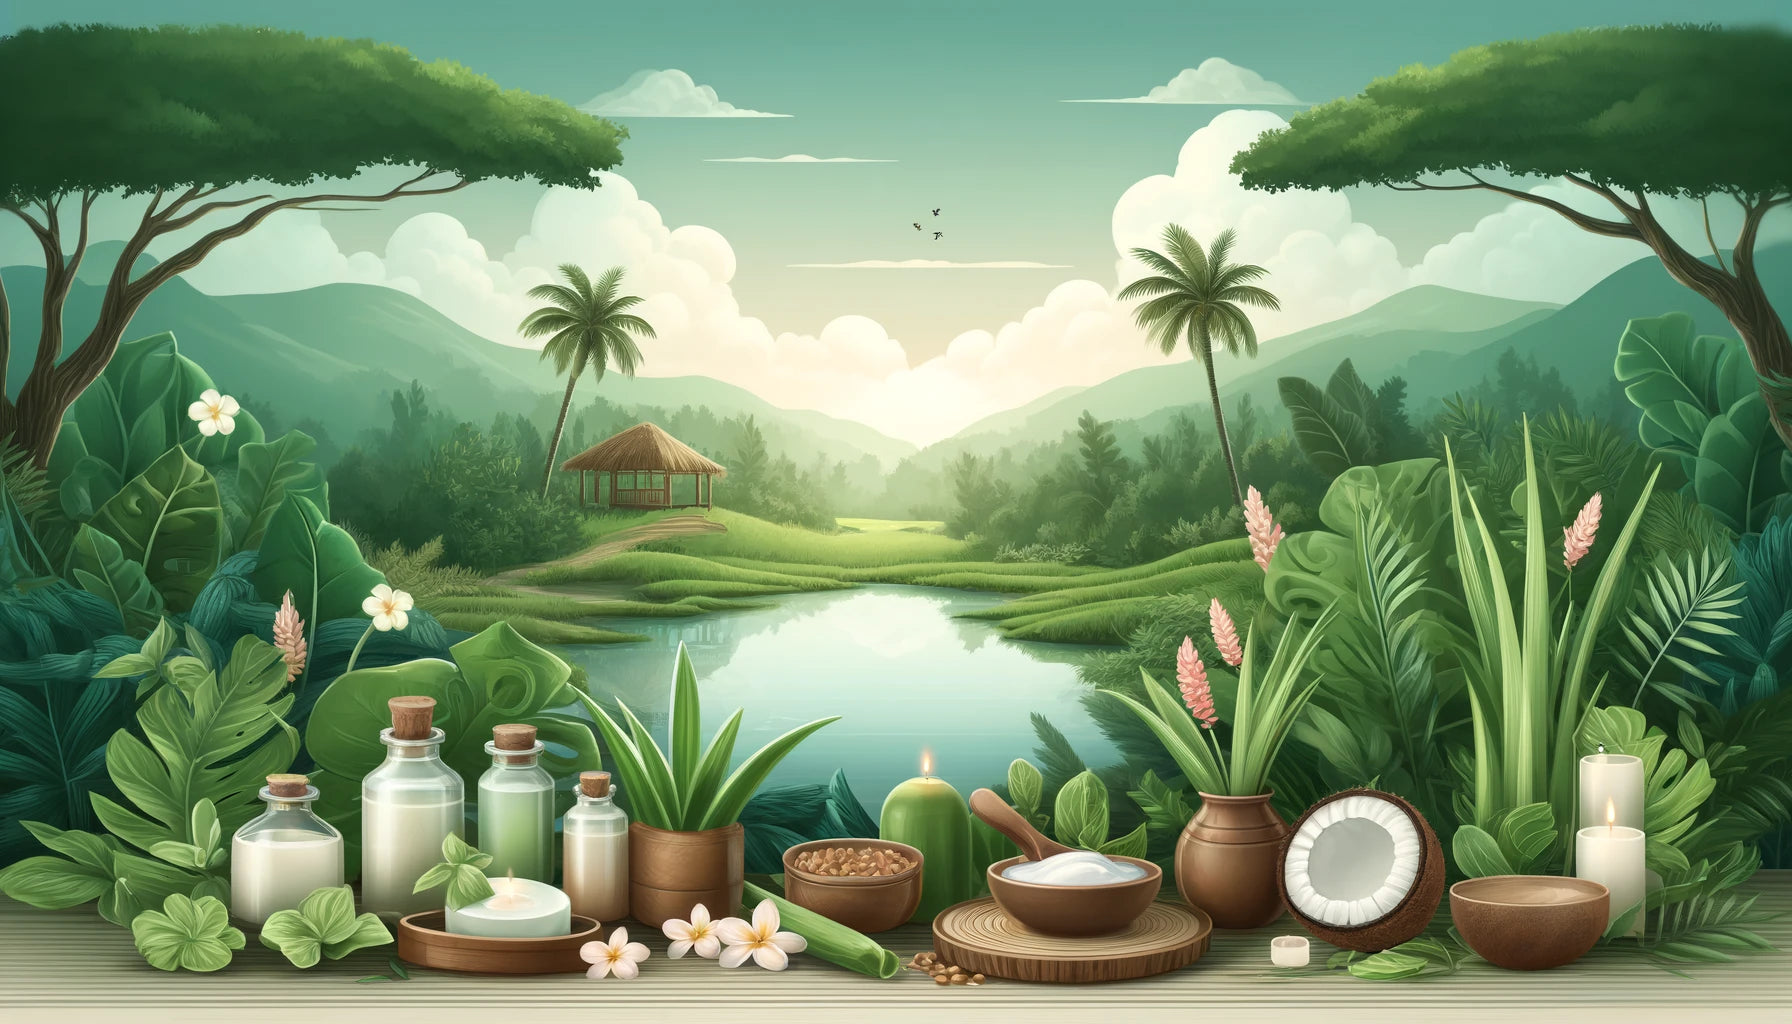 A serene and natural setting showcasing lush greenery and natural ingredients for eyebrow growth, including aloe vera, coconuts, and fenugreek seeds, reflecting a holistic approach to beauty and wellness.